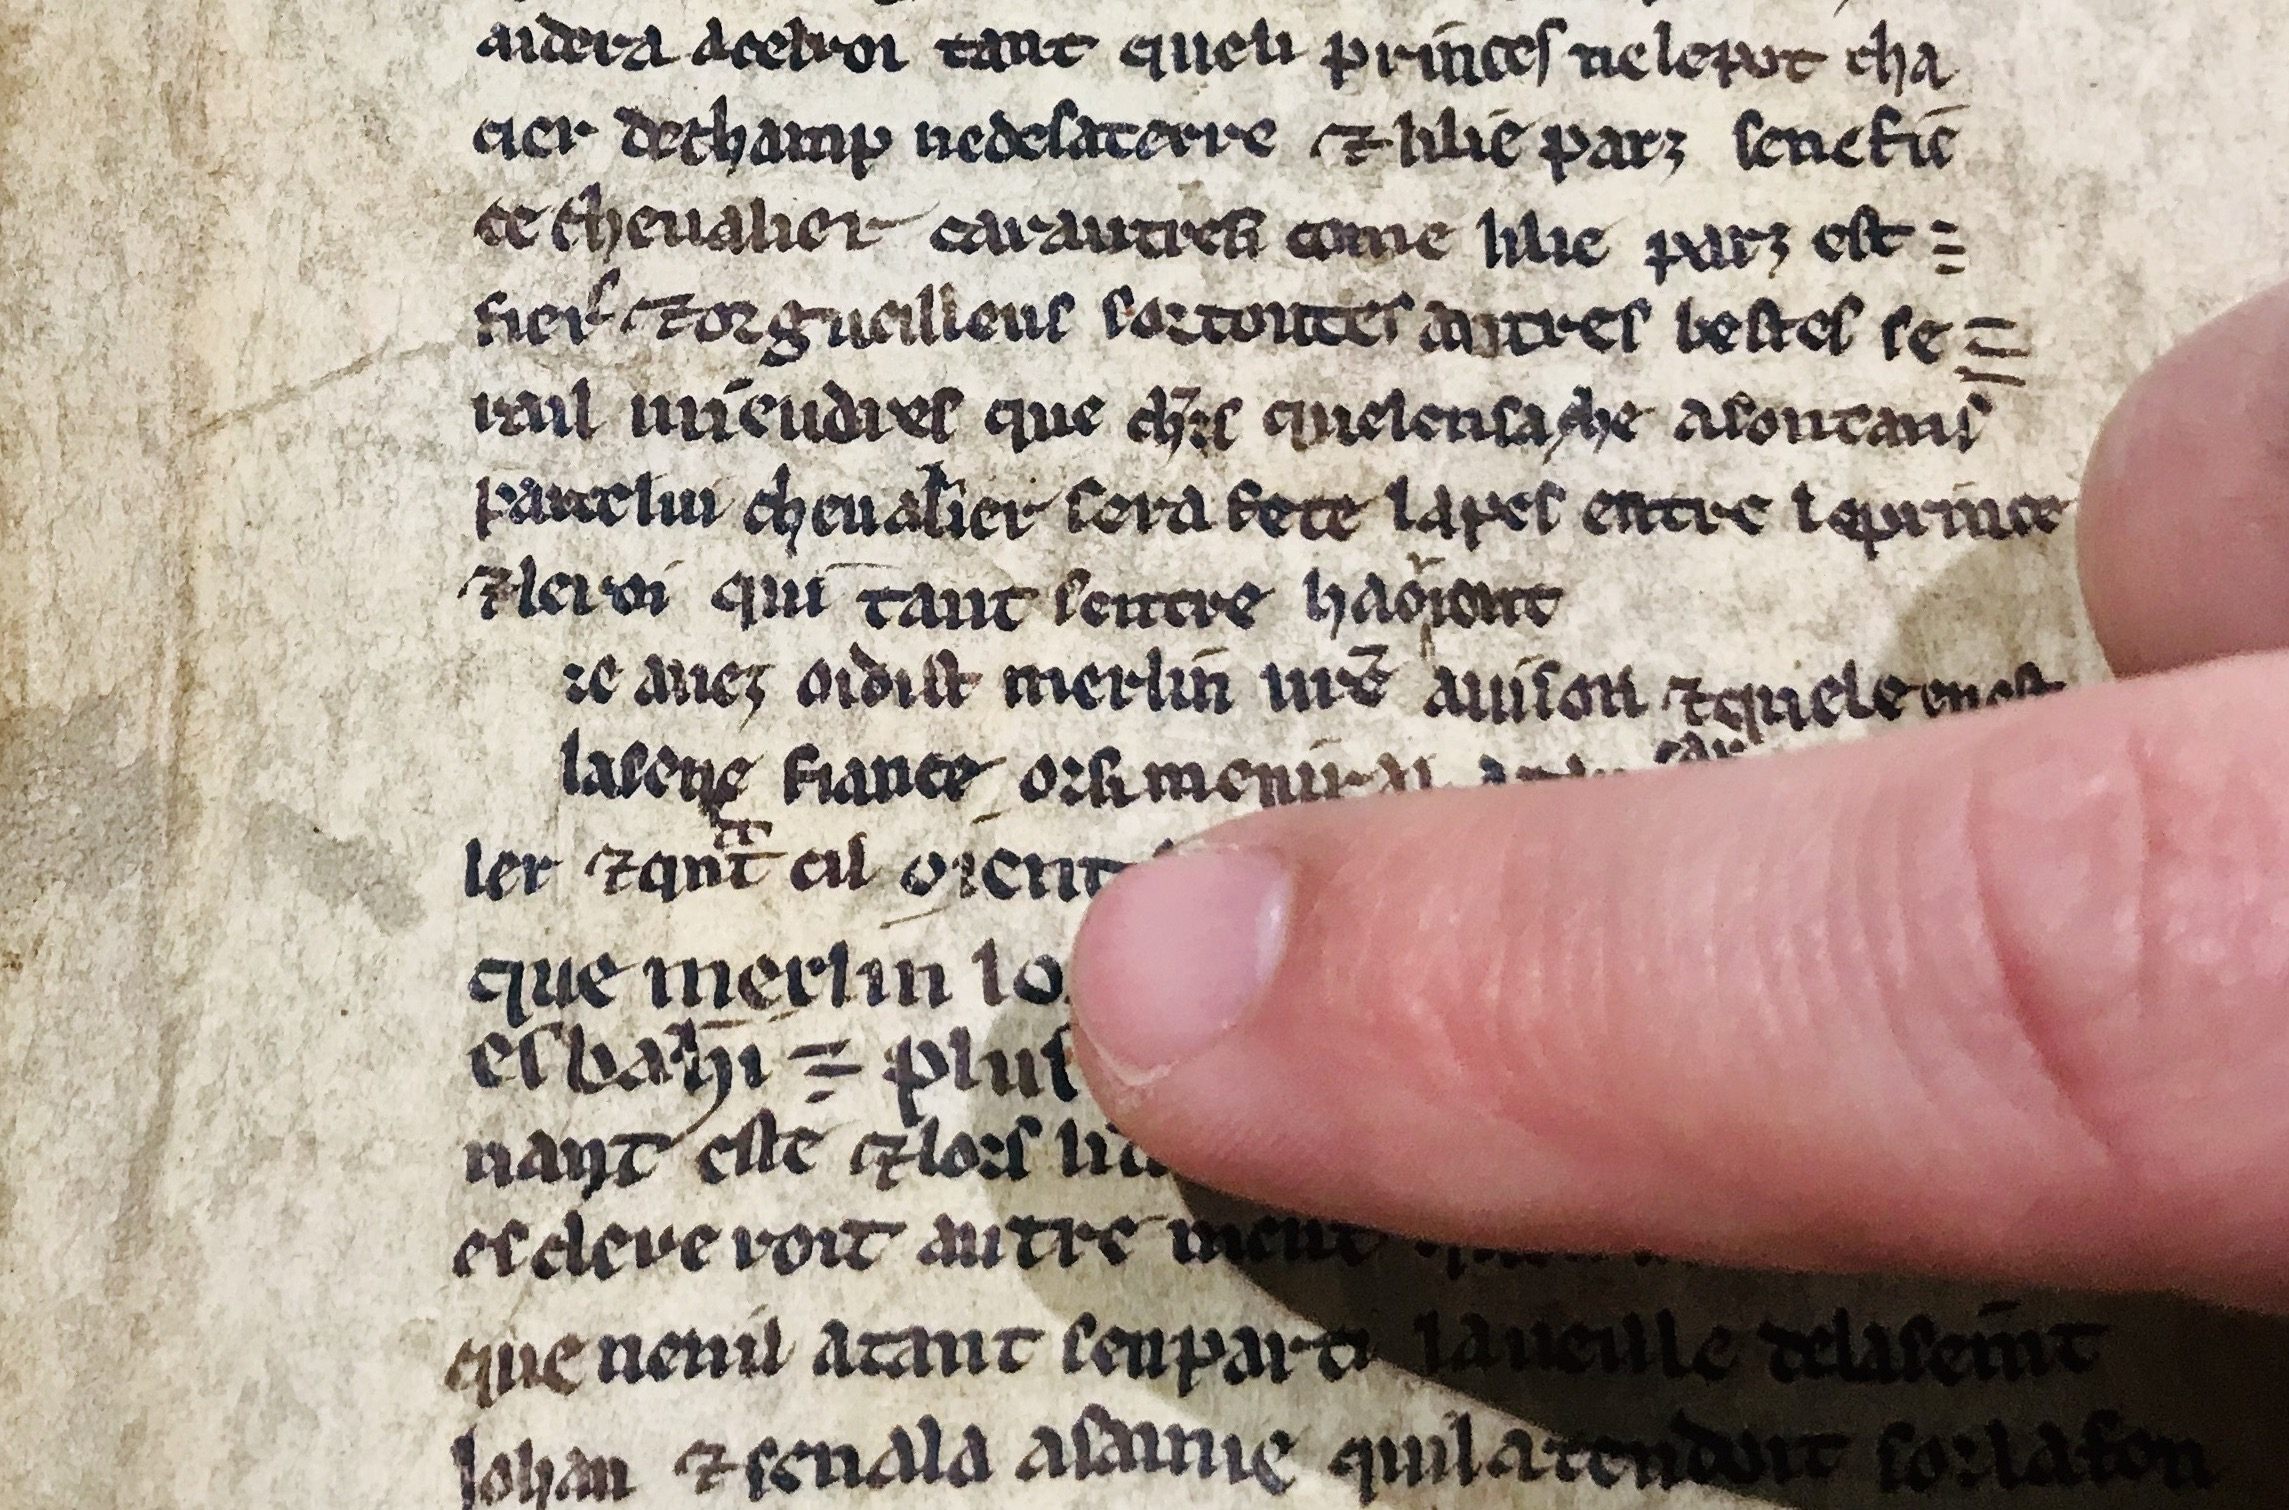 Lost King Arthur and Merlin tale found in 800-year-old book